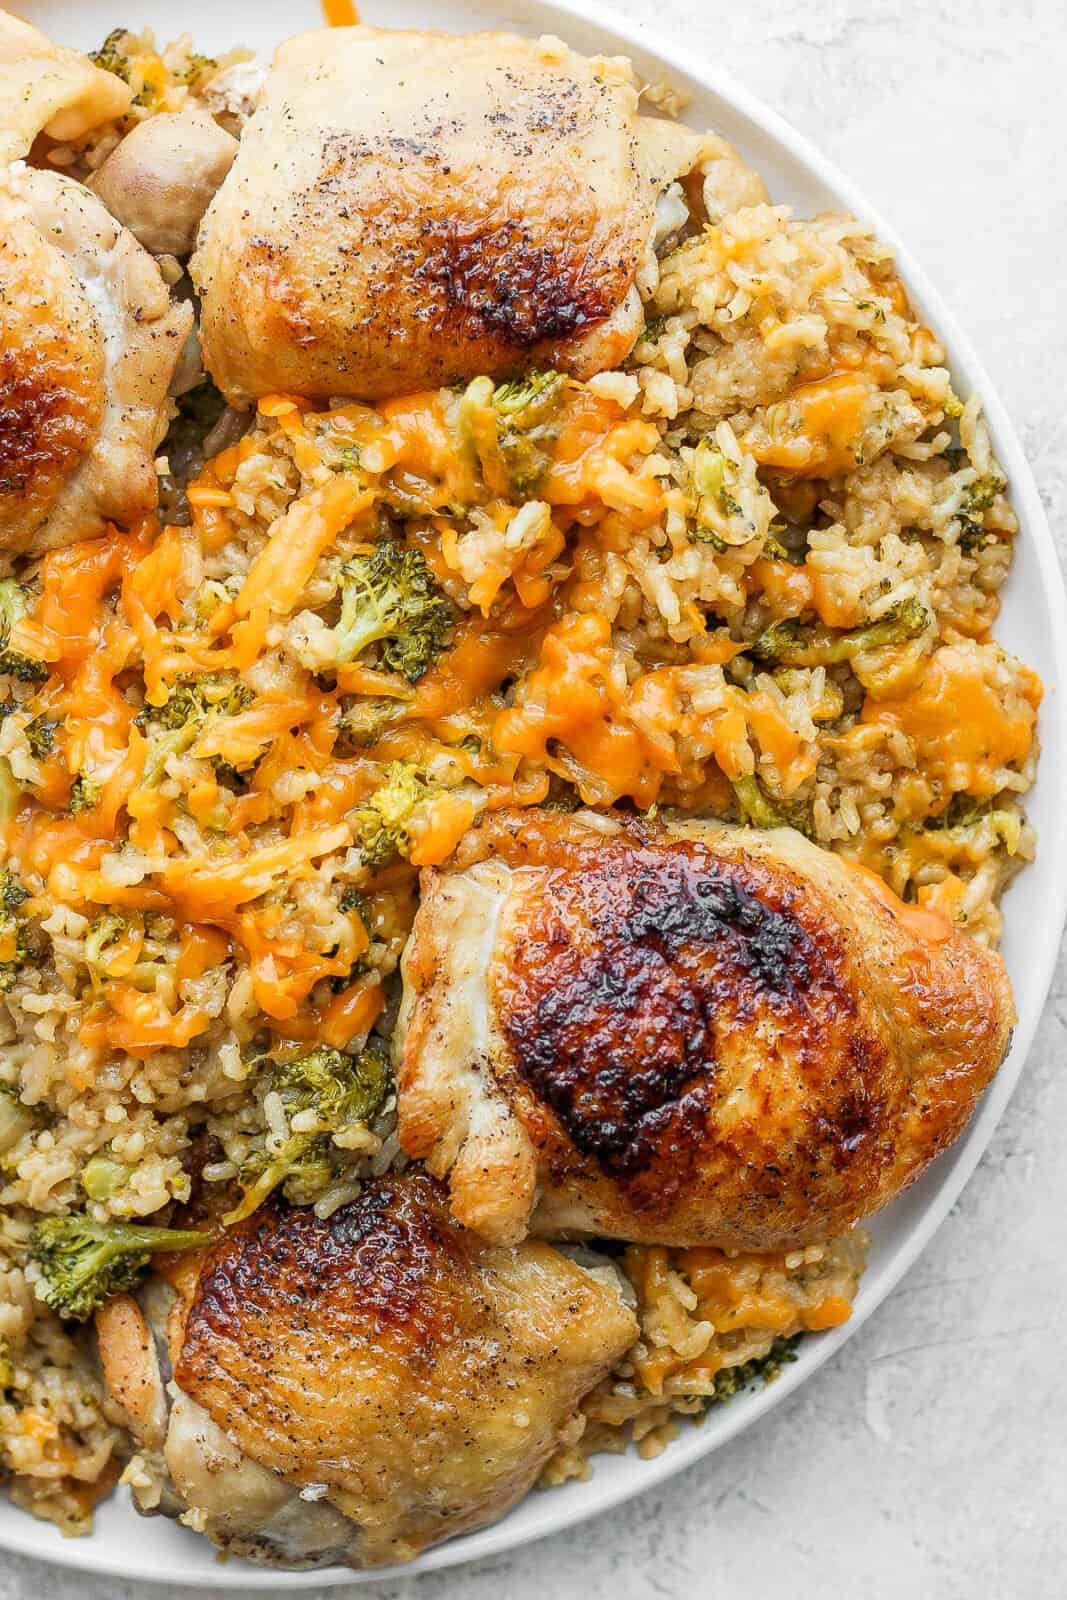 A plate of cheesy chicken broccoli and rice.